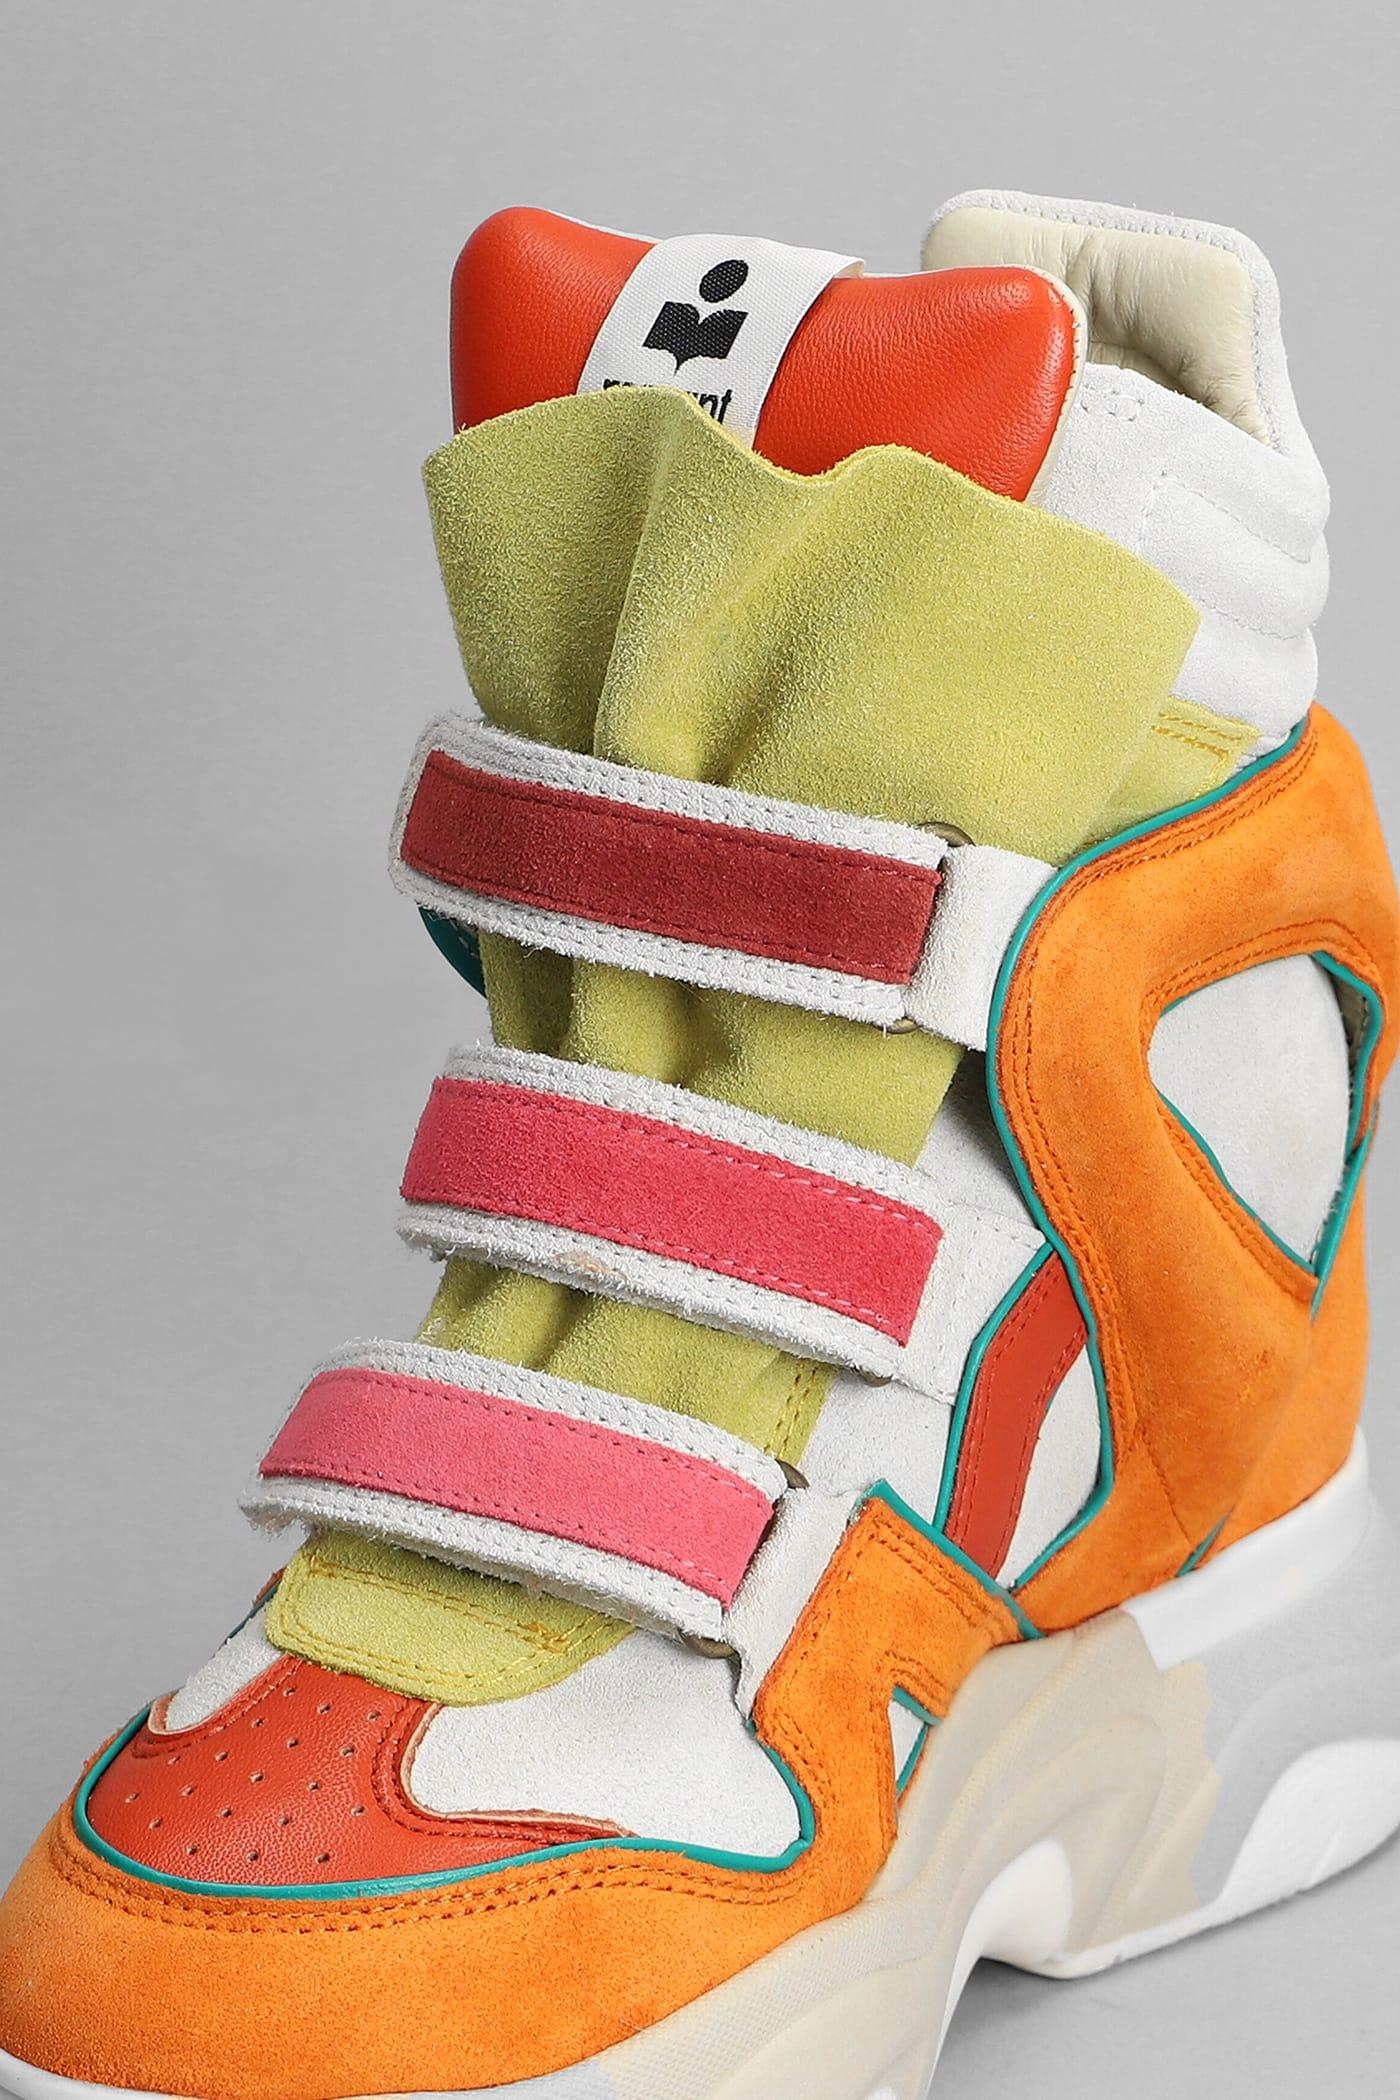 Isabel Marant Balskee Sneakers Orange Suede And Leather | Lyst